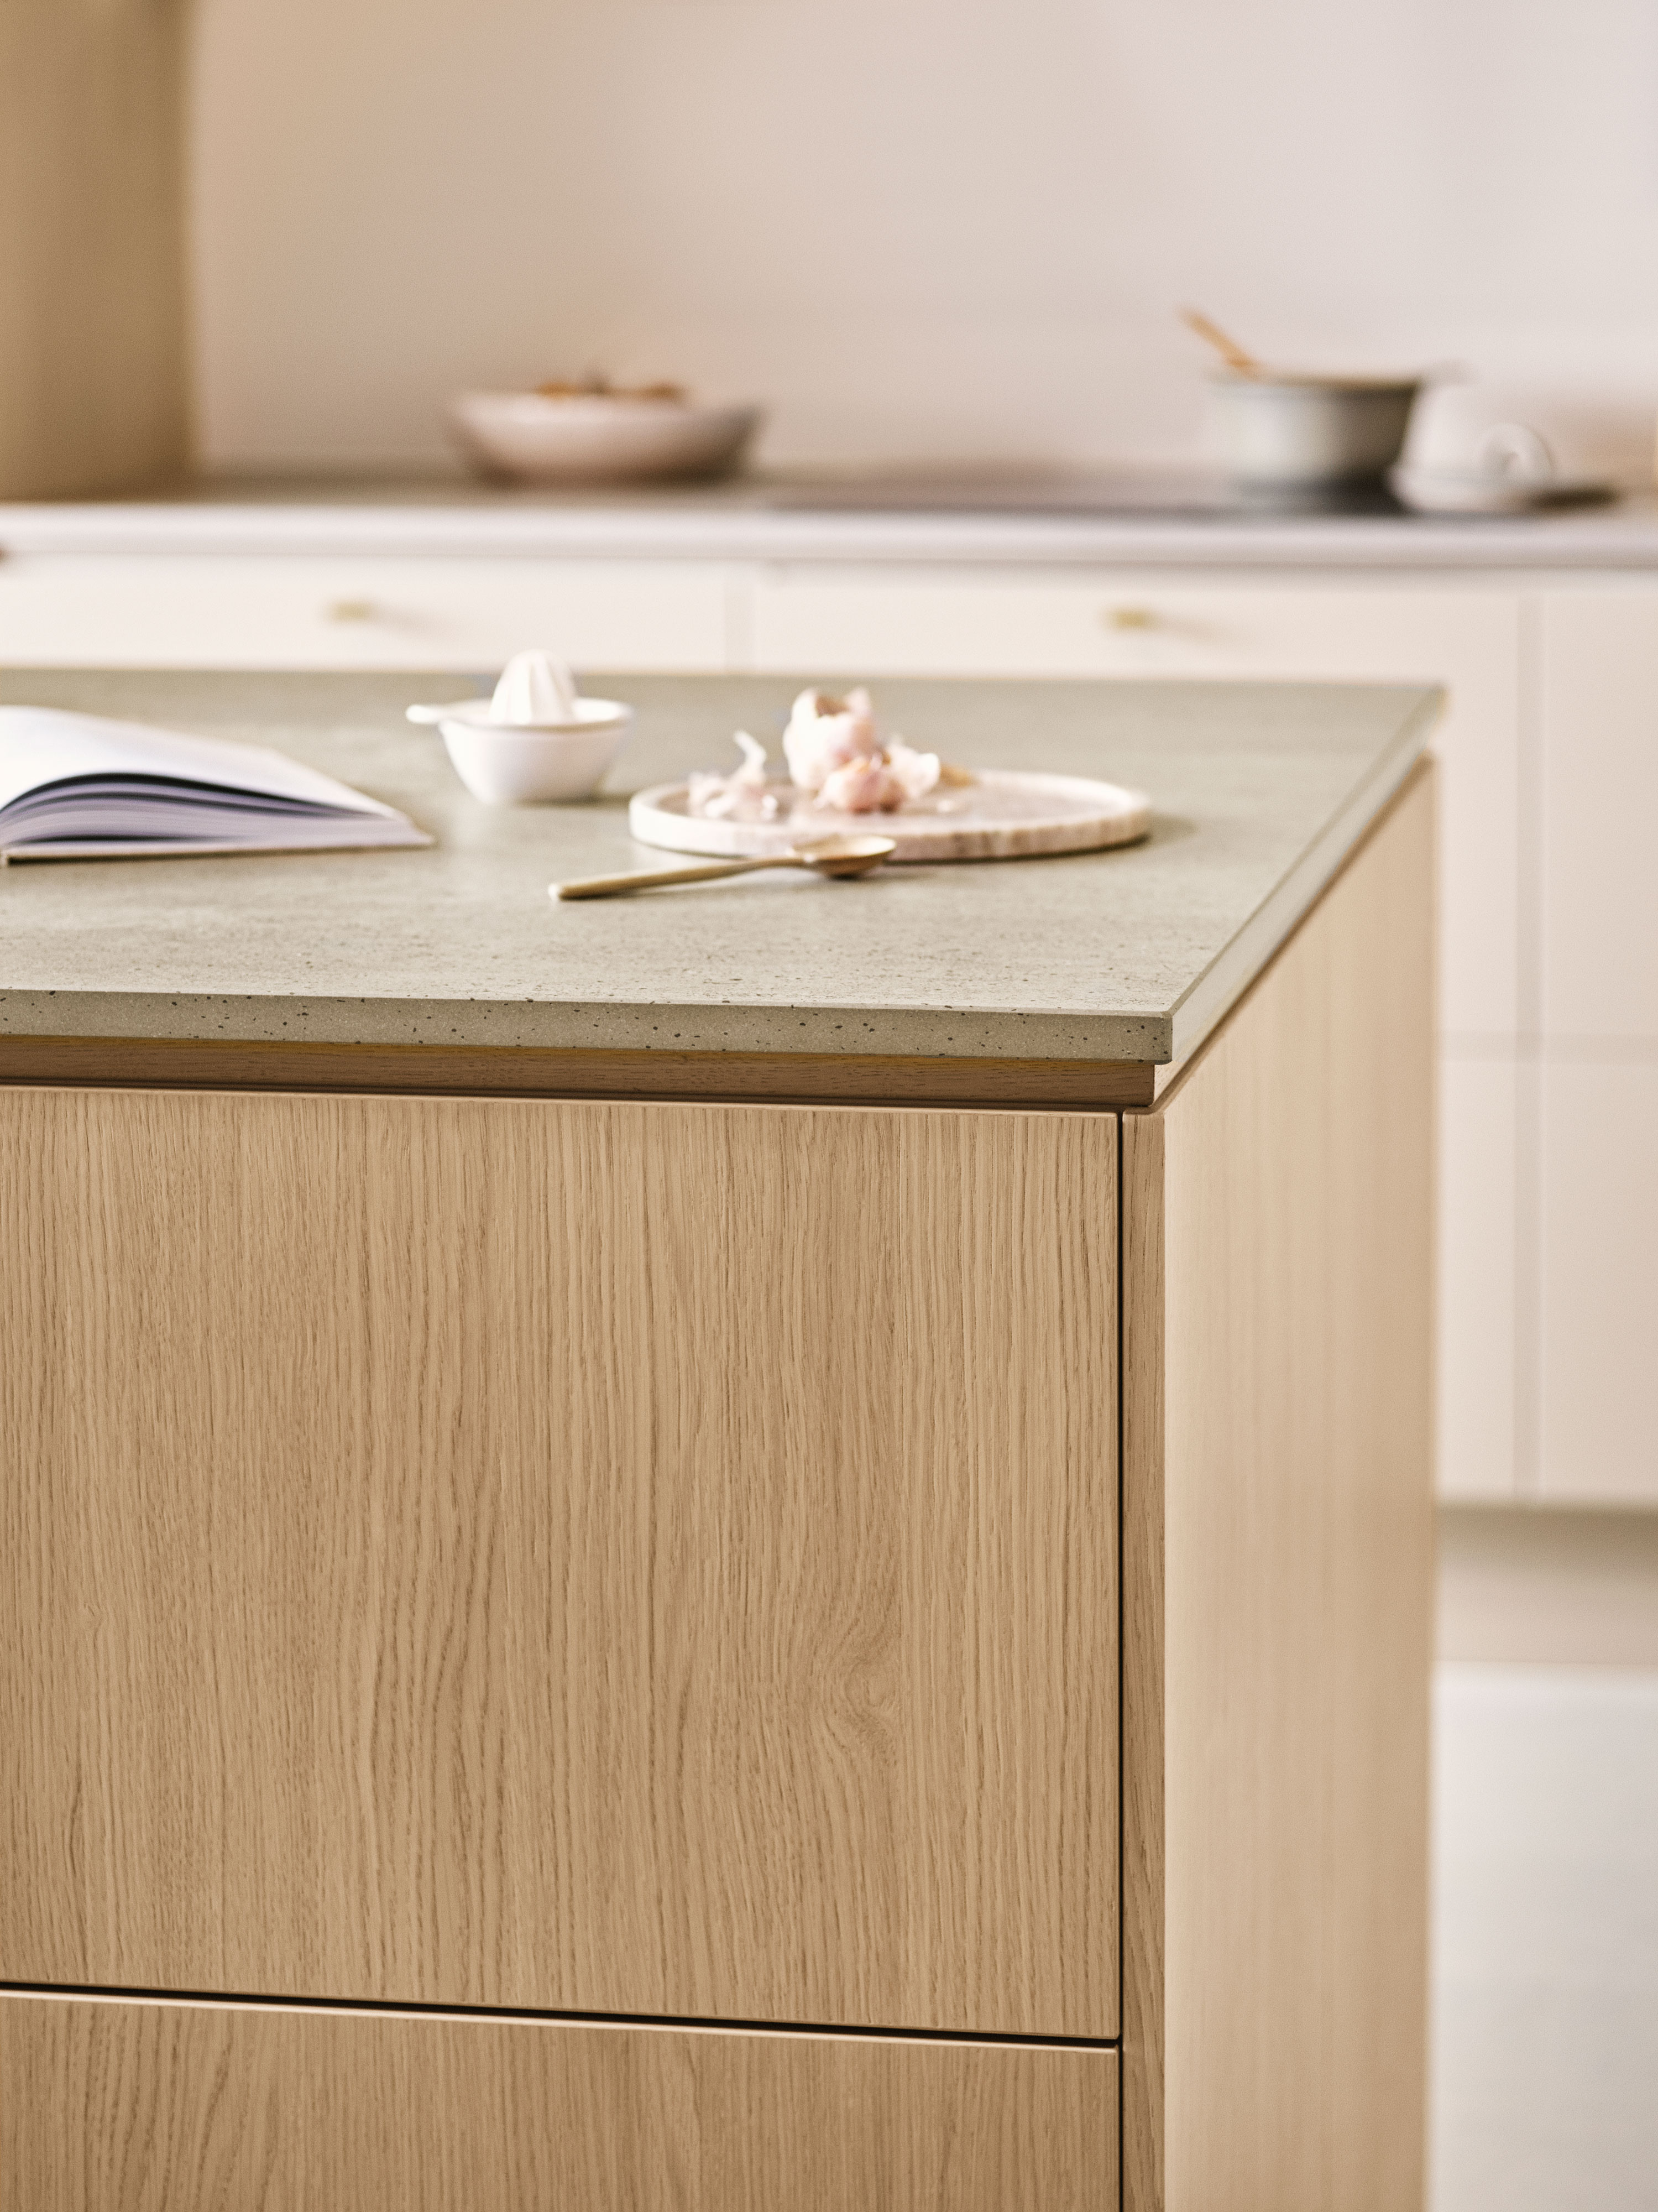 Wooden Epoq Edge Natural Oak and Trend Greige kitchen detail picture